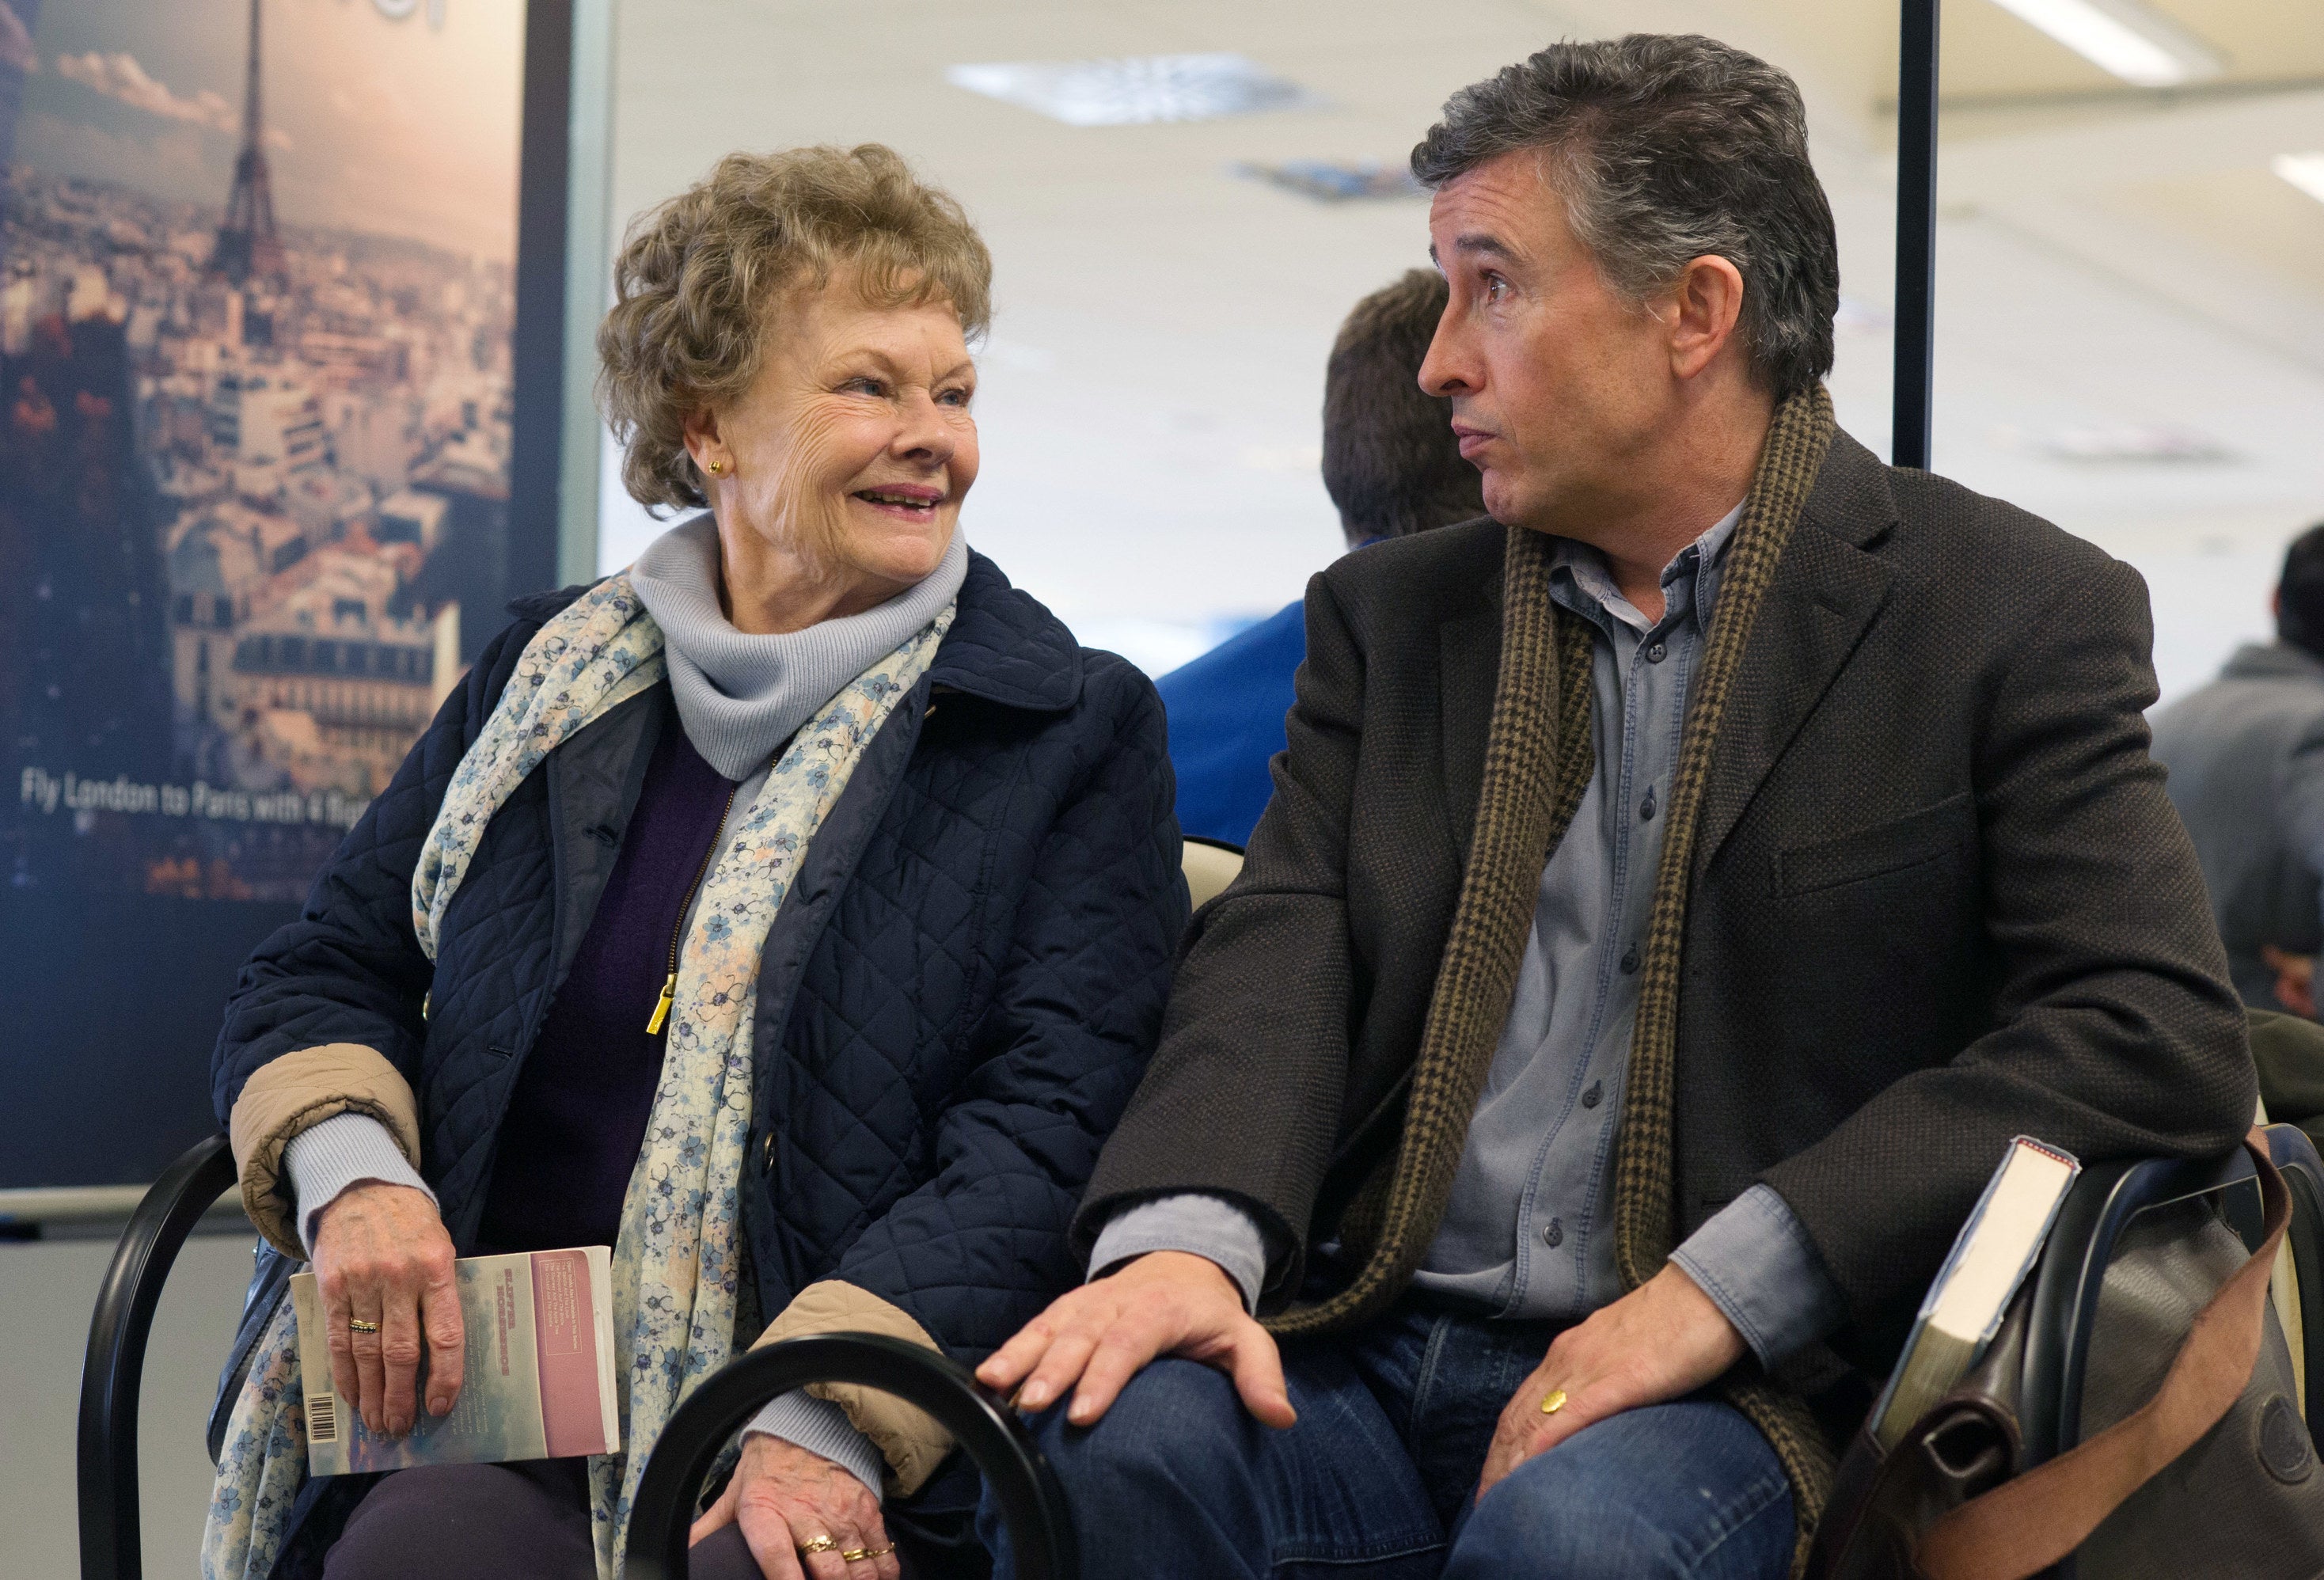 Judi Dench and Steve Coogan sit next to each other at an airport